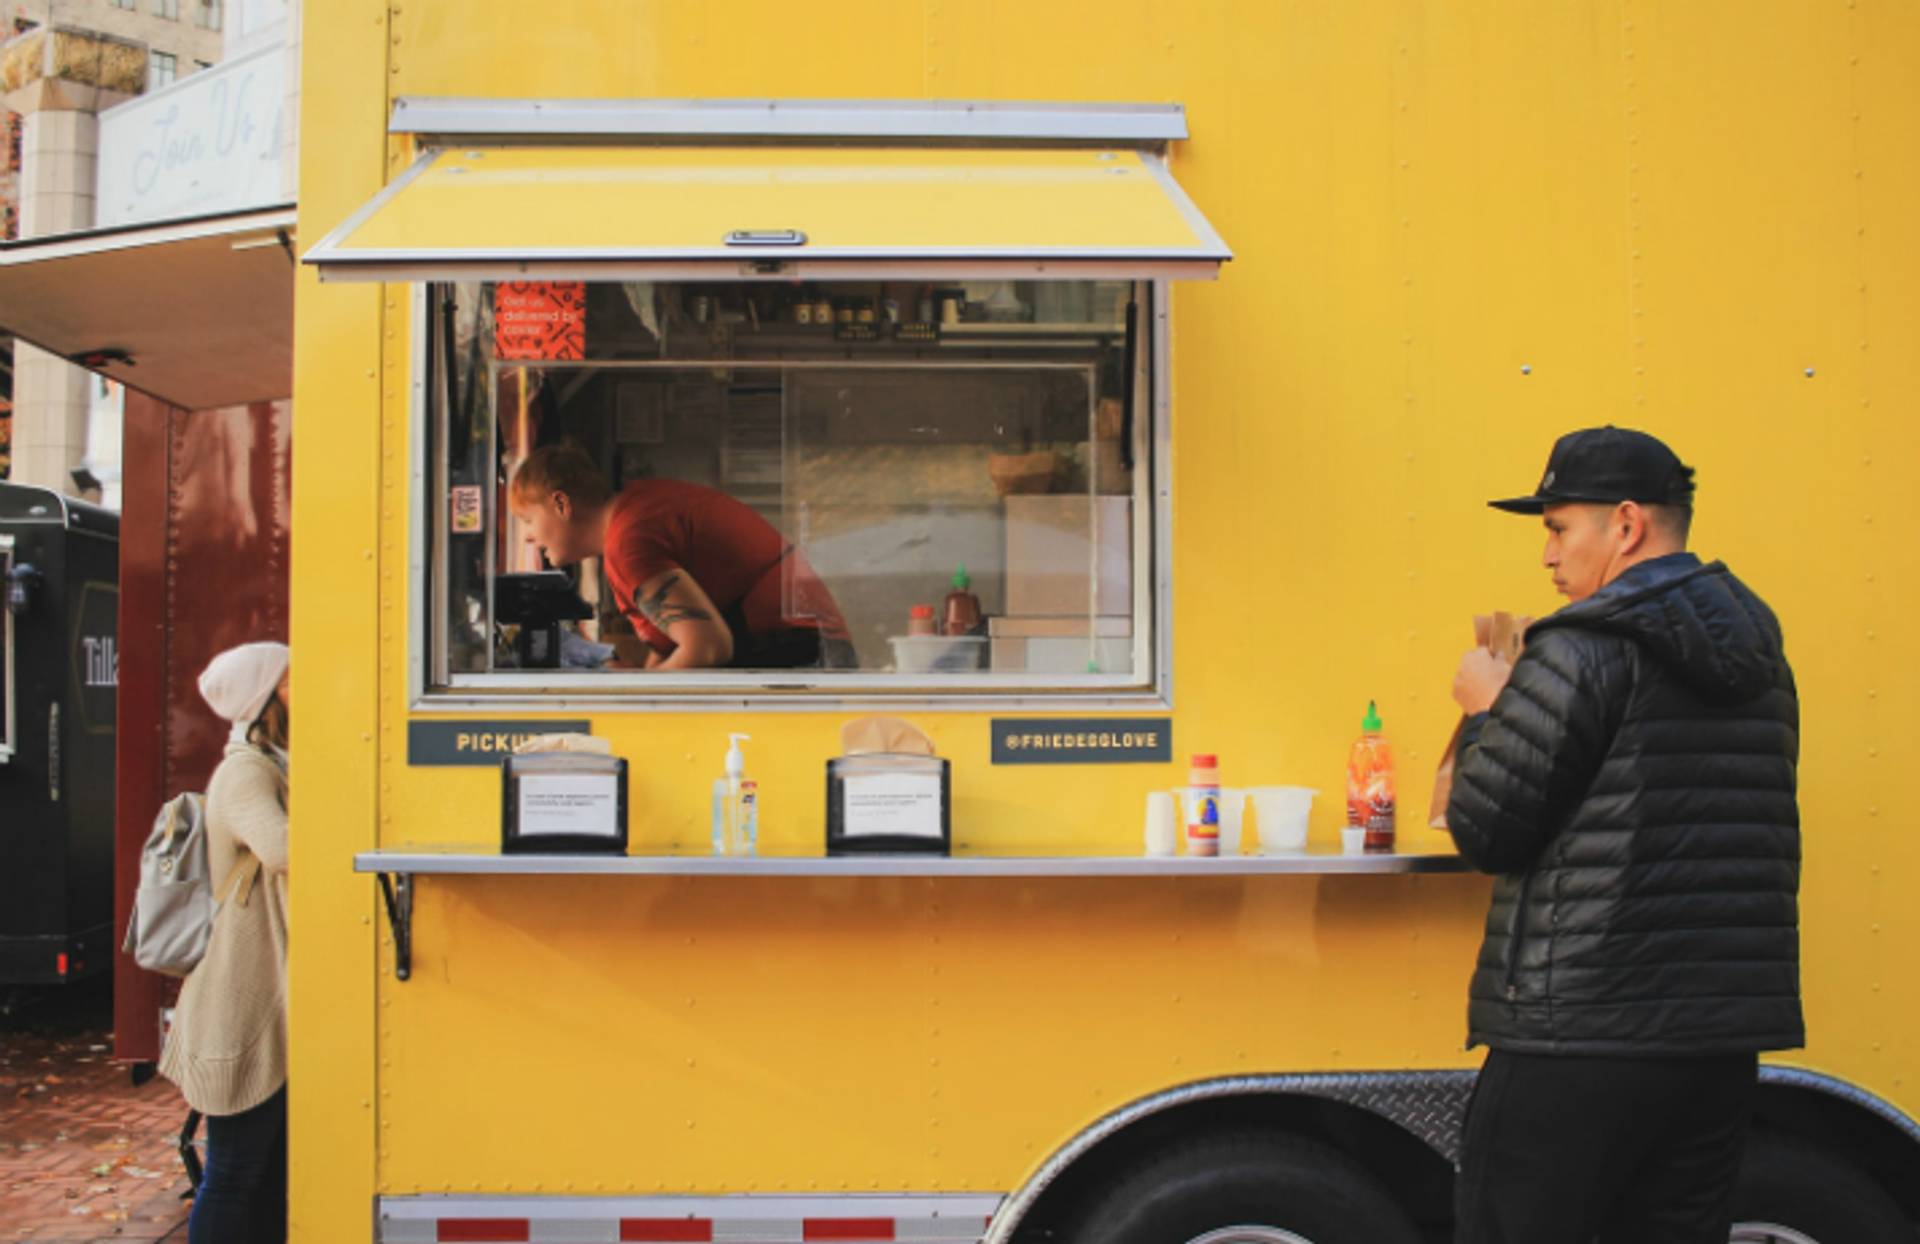 Where the Truck gets foodies out of their delivery rut